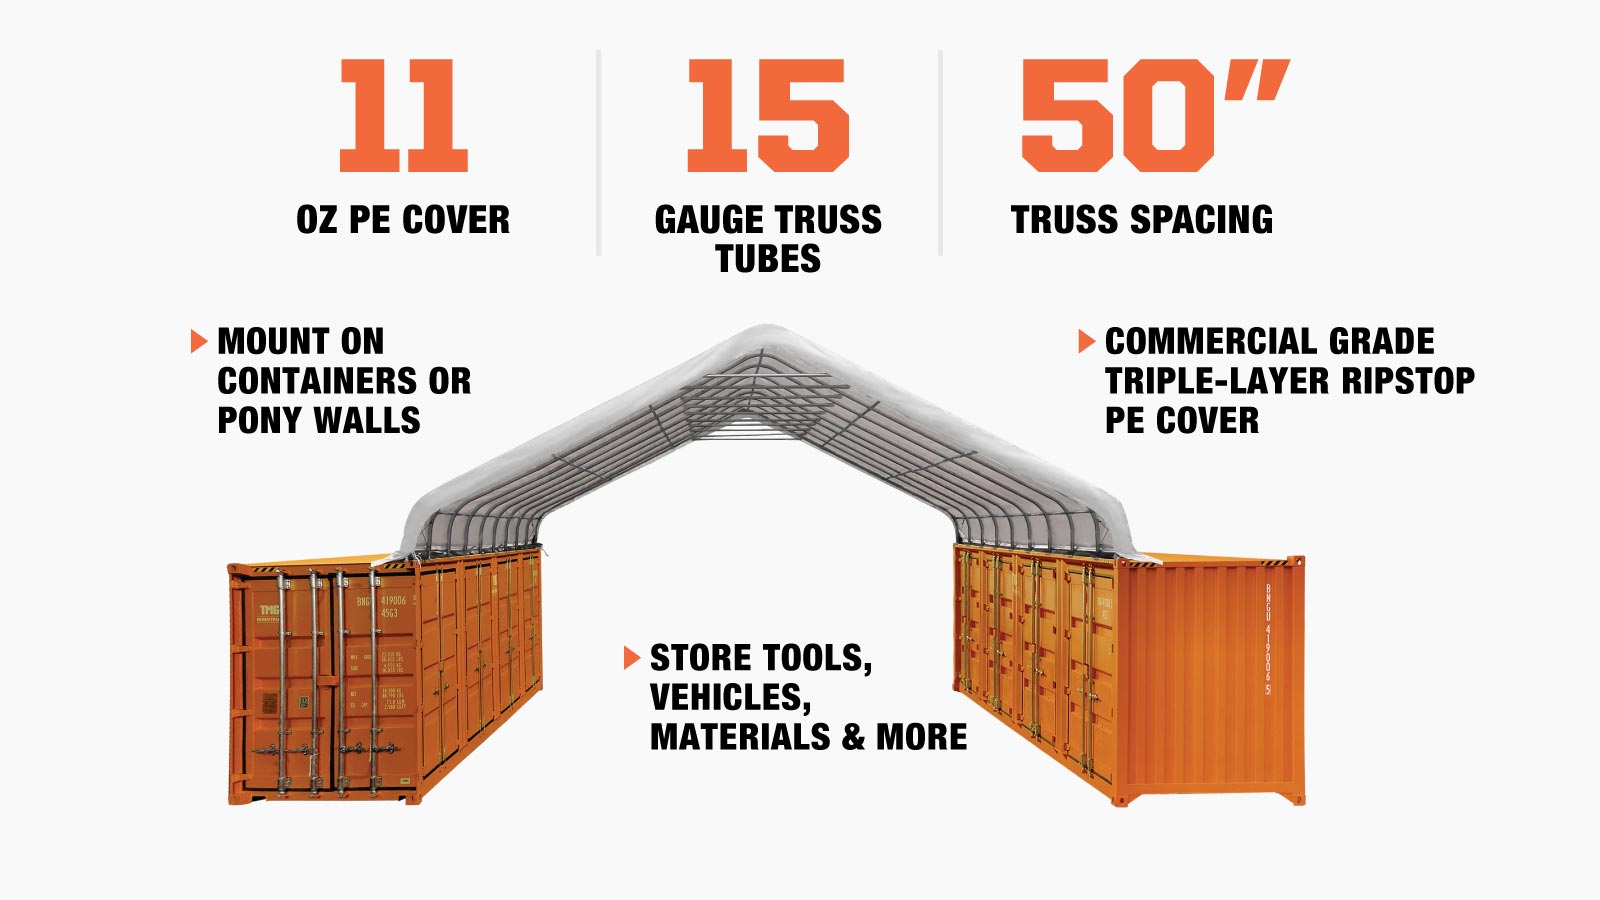 TMG Industrial 30' x 40' PE Fabric Pro Series Container Peak Roof Shelter, Fire Retardant, Water Resistant, UV Protected, TMG-ST3041CE(Previously TMG-ST3040CE)-description-image